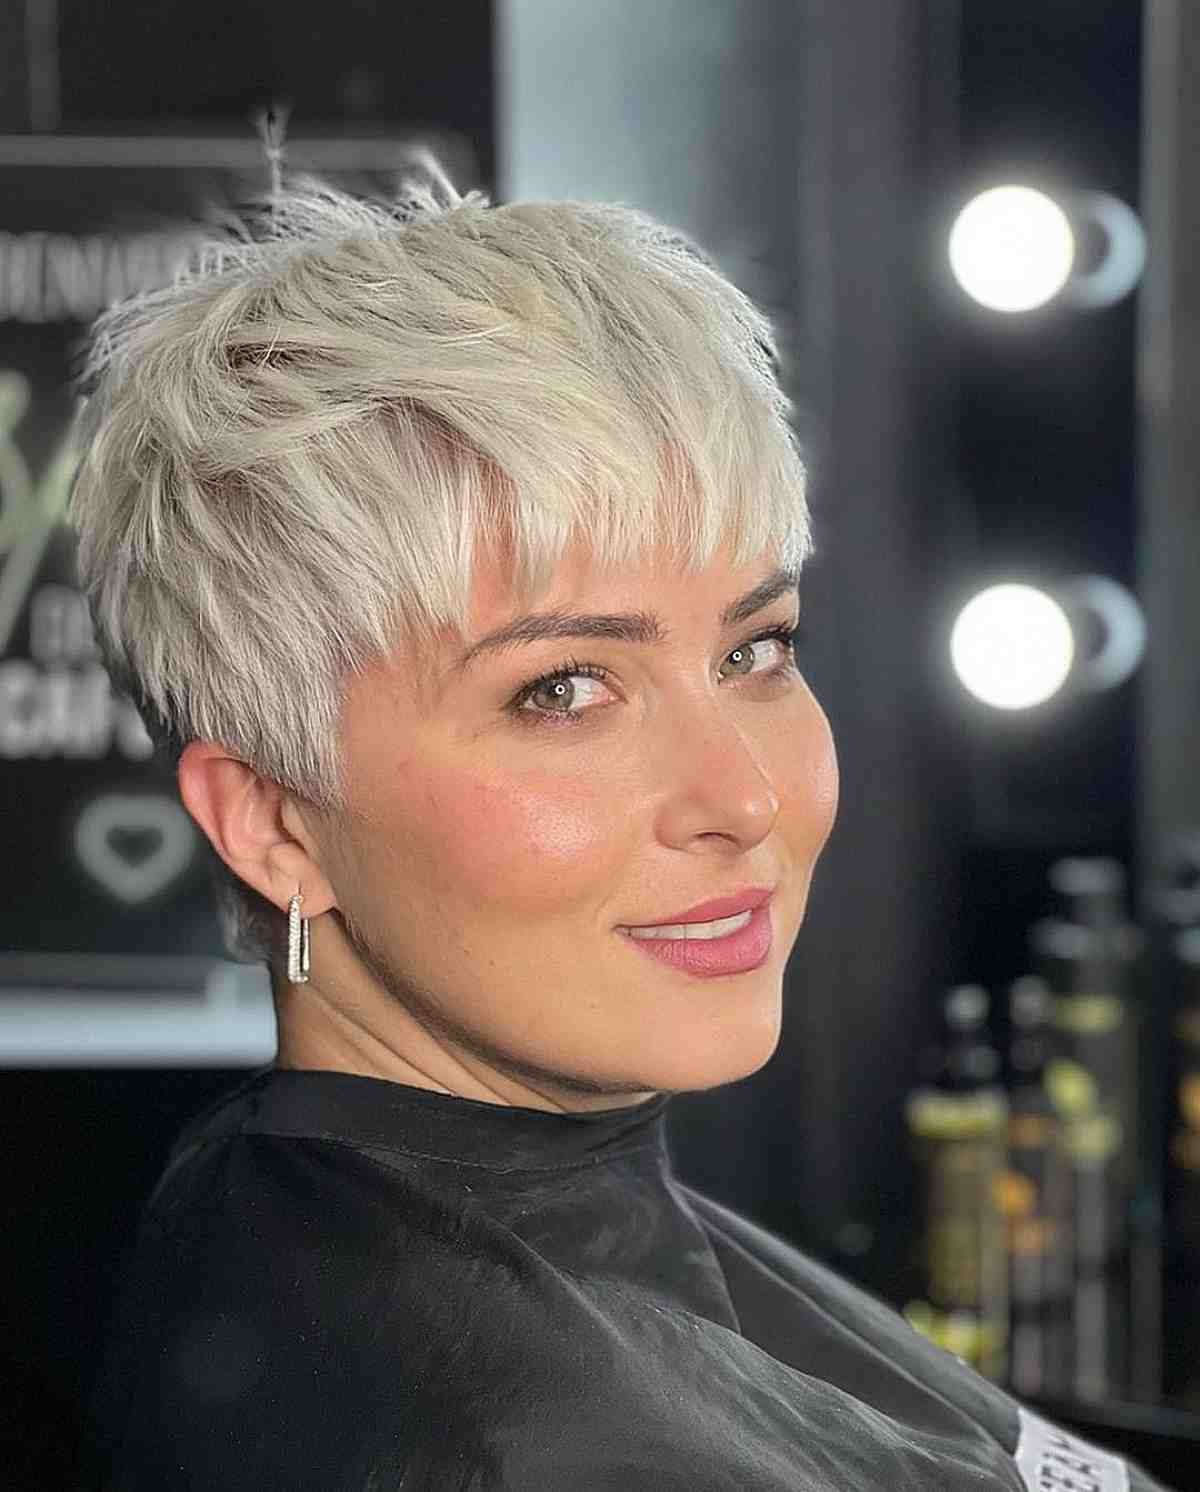 Edgy Pixie Cut with Straight-Across Bangs